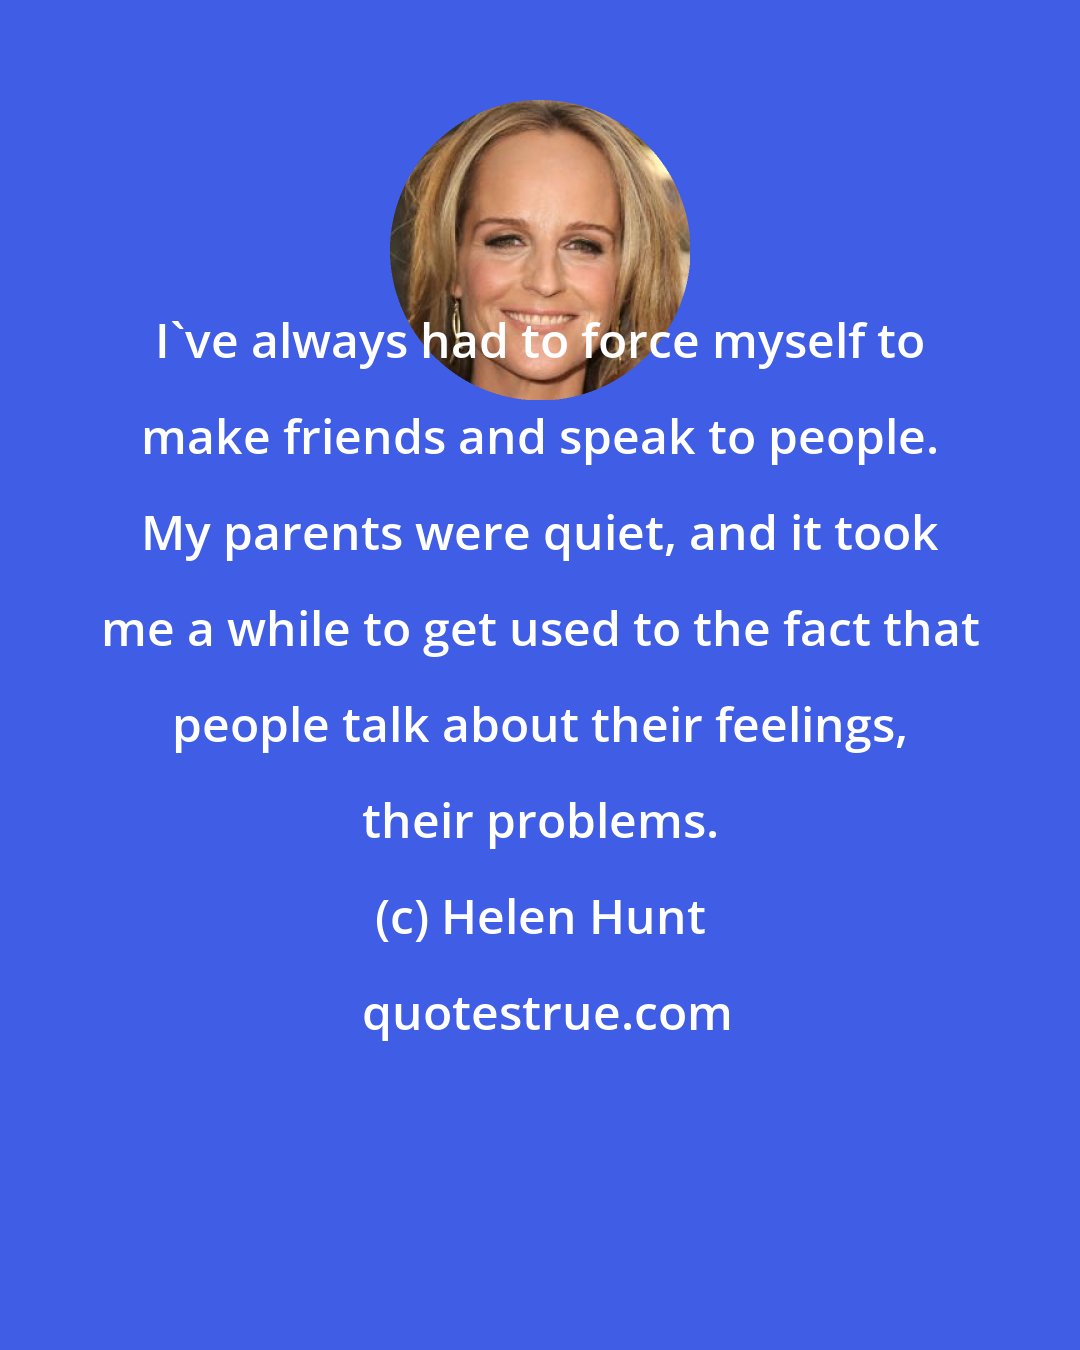 Helen Hunt: I've always had to force myself to make friends and speak to people. My parents were quiet, and it took me a while to get used to the fact that people talk about their feelings, their problems.